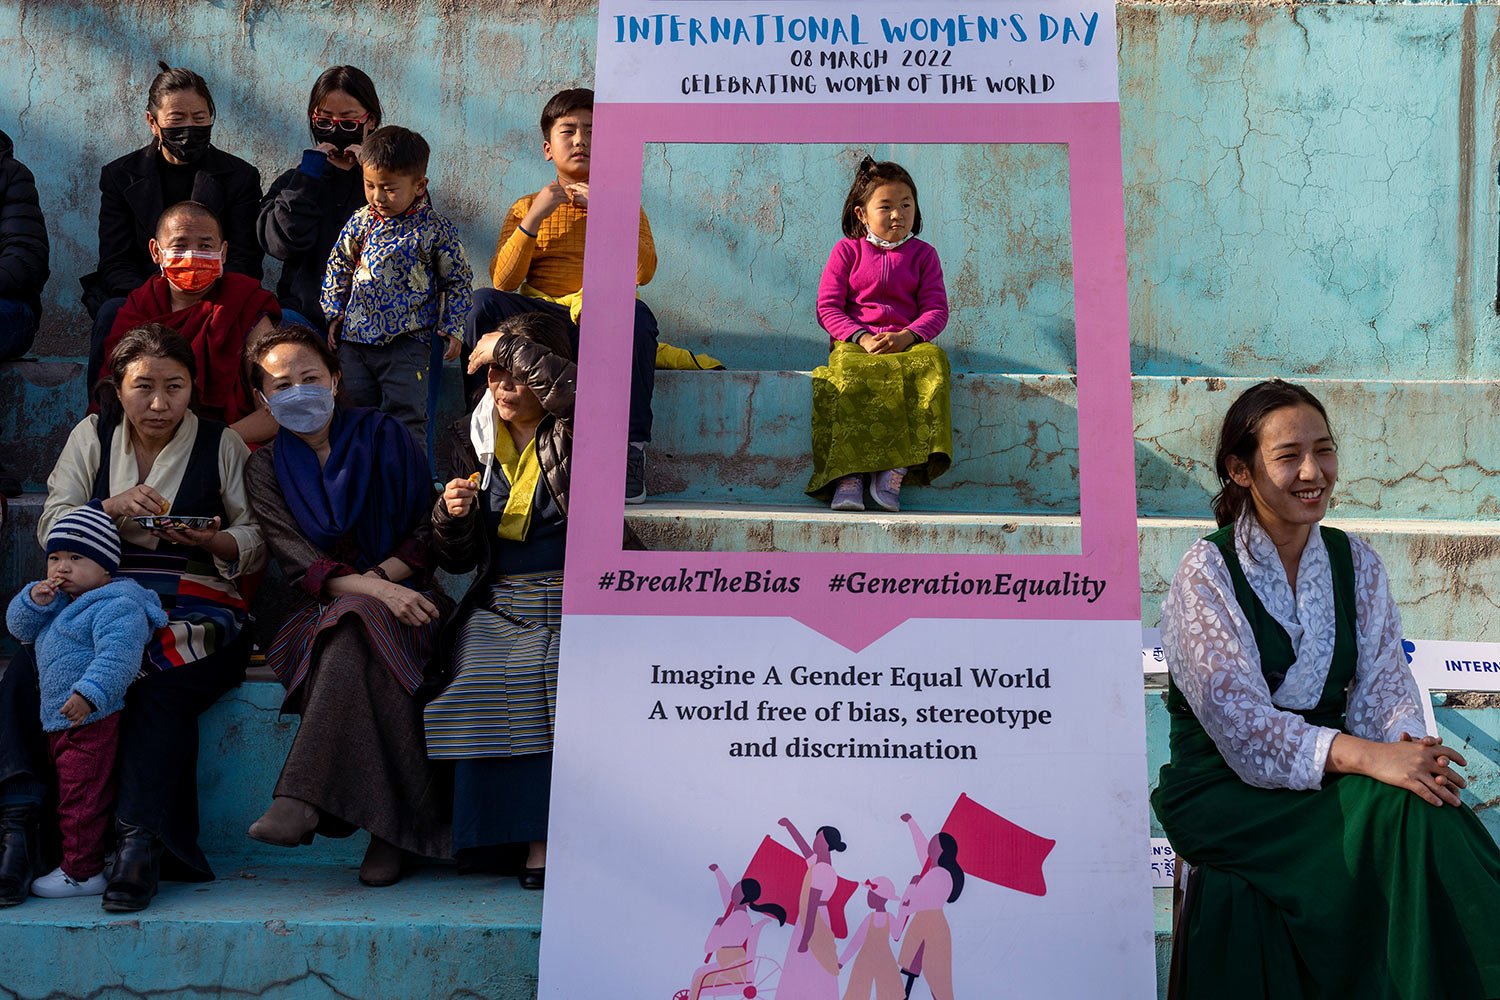  Exile Tibetan women and children gather at a fete to celebrate the International Women's Day in Dharmsala, India, Tuesday, March 8, 2022. (AP Photo/Ashwini Bhatia) 